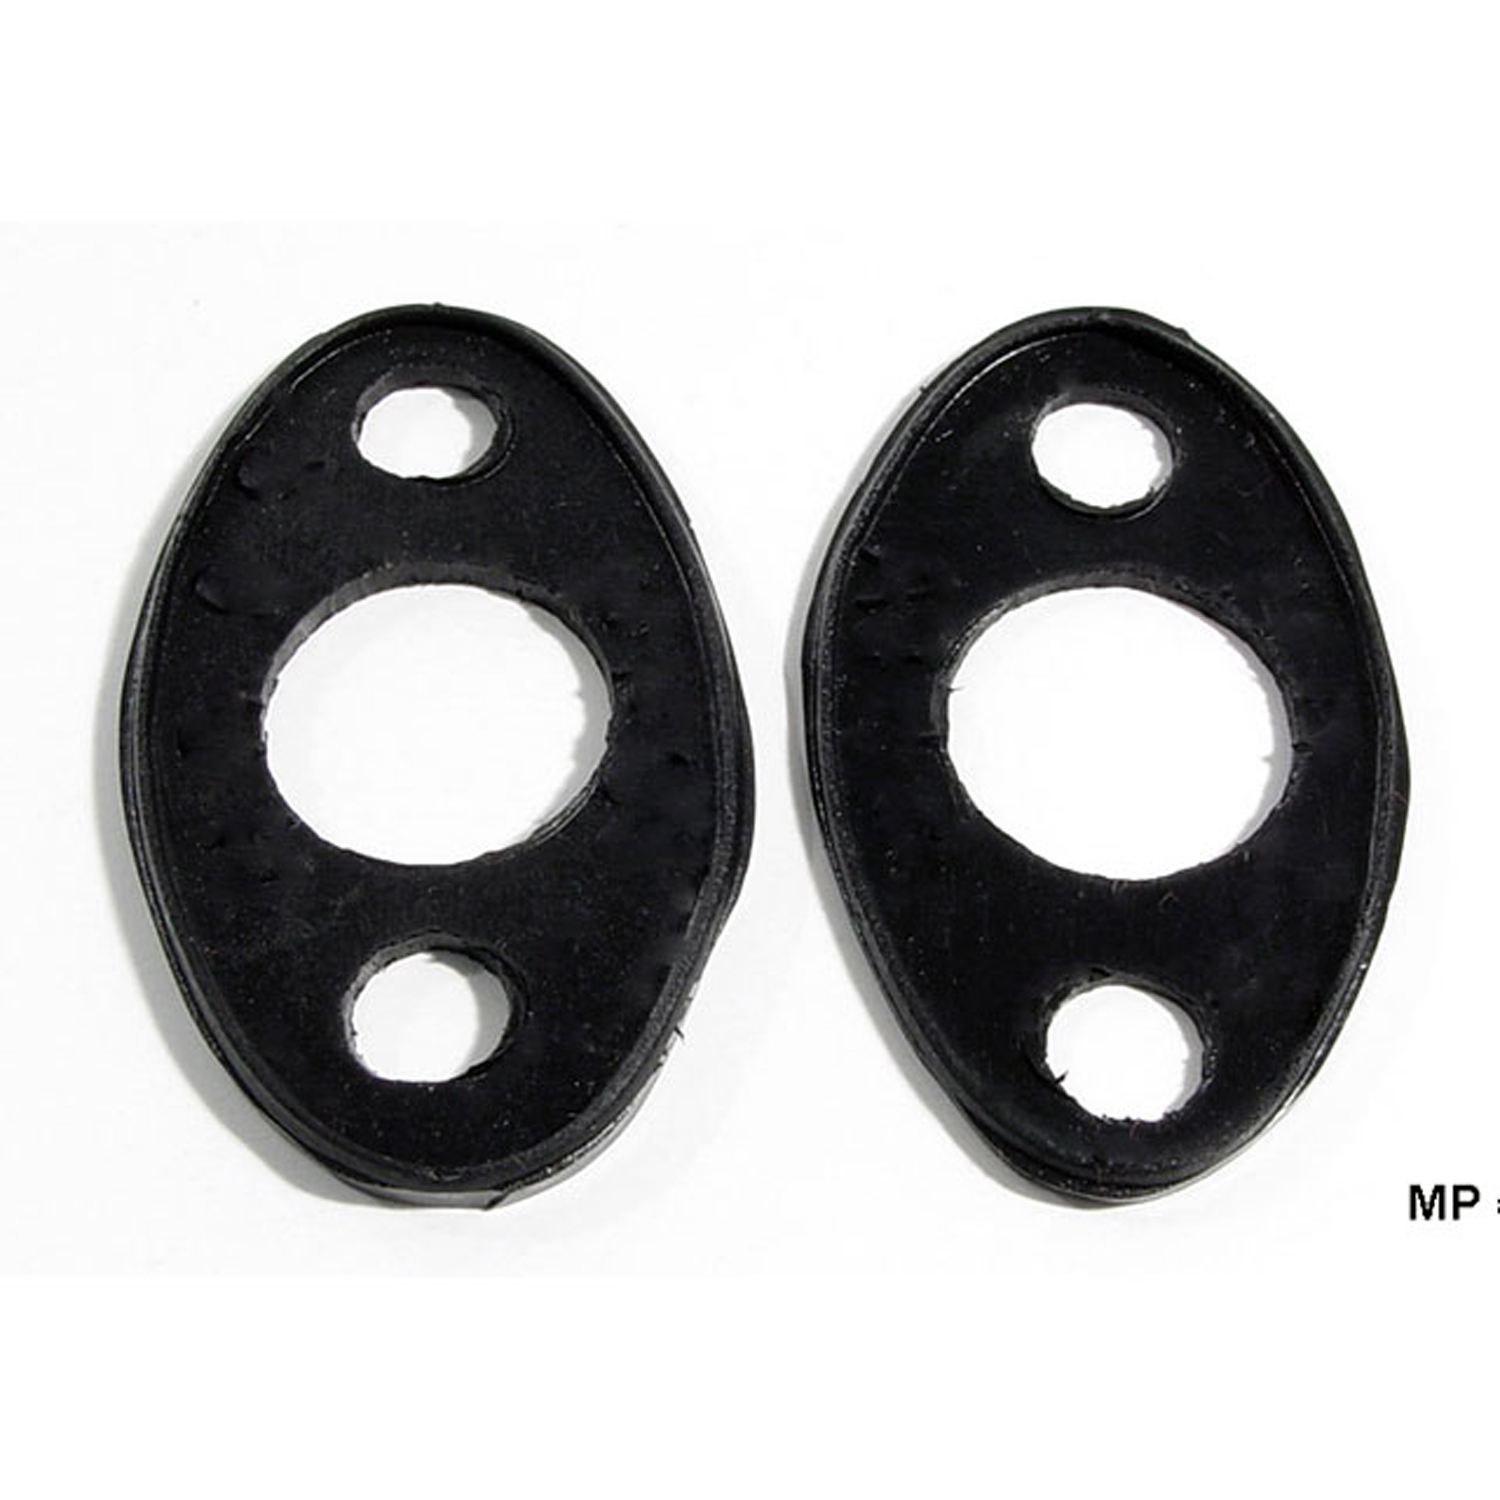 1930 Chrysler Imperial Door Handle Pads.  1-1/4 wide X 2-1/4 long.  Pair-MP 559-A